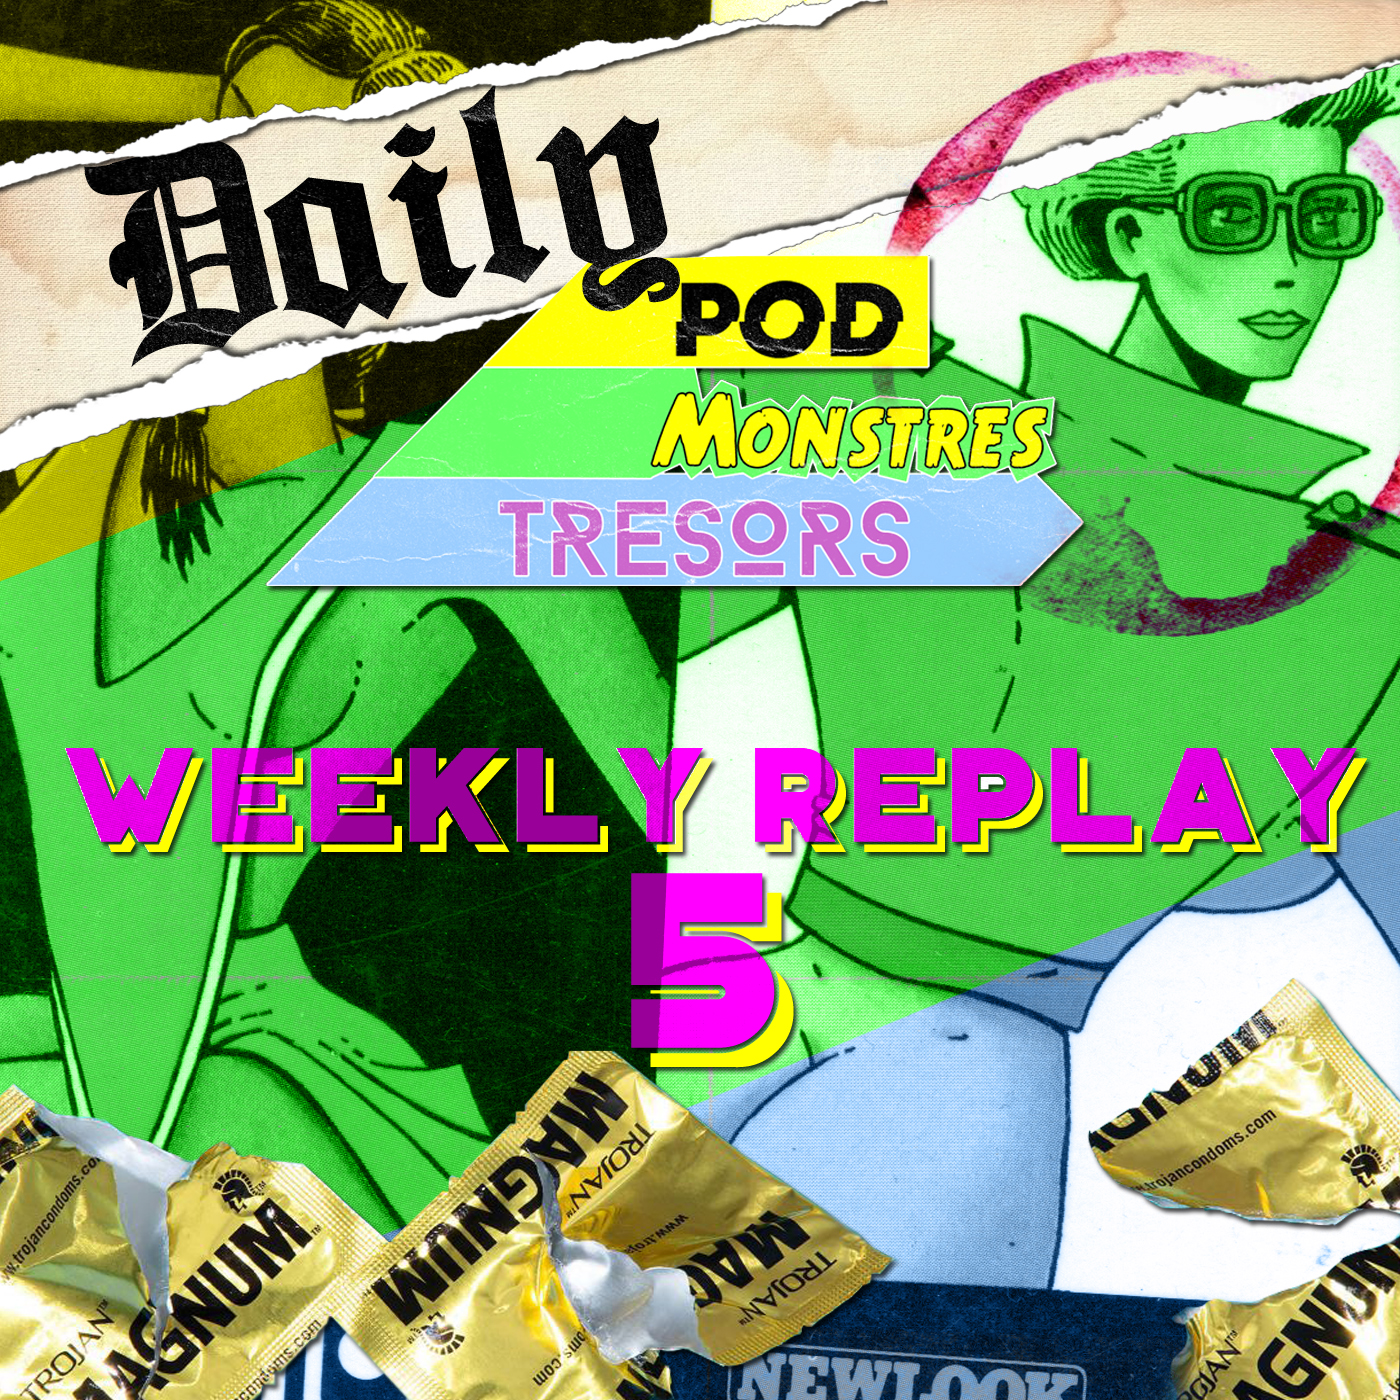 Daily Pod Monstres Trésors : Mexico Melody – Le Weekly Replay 5